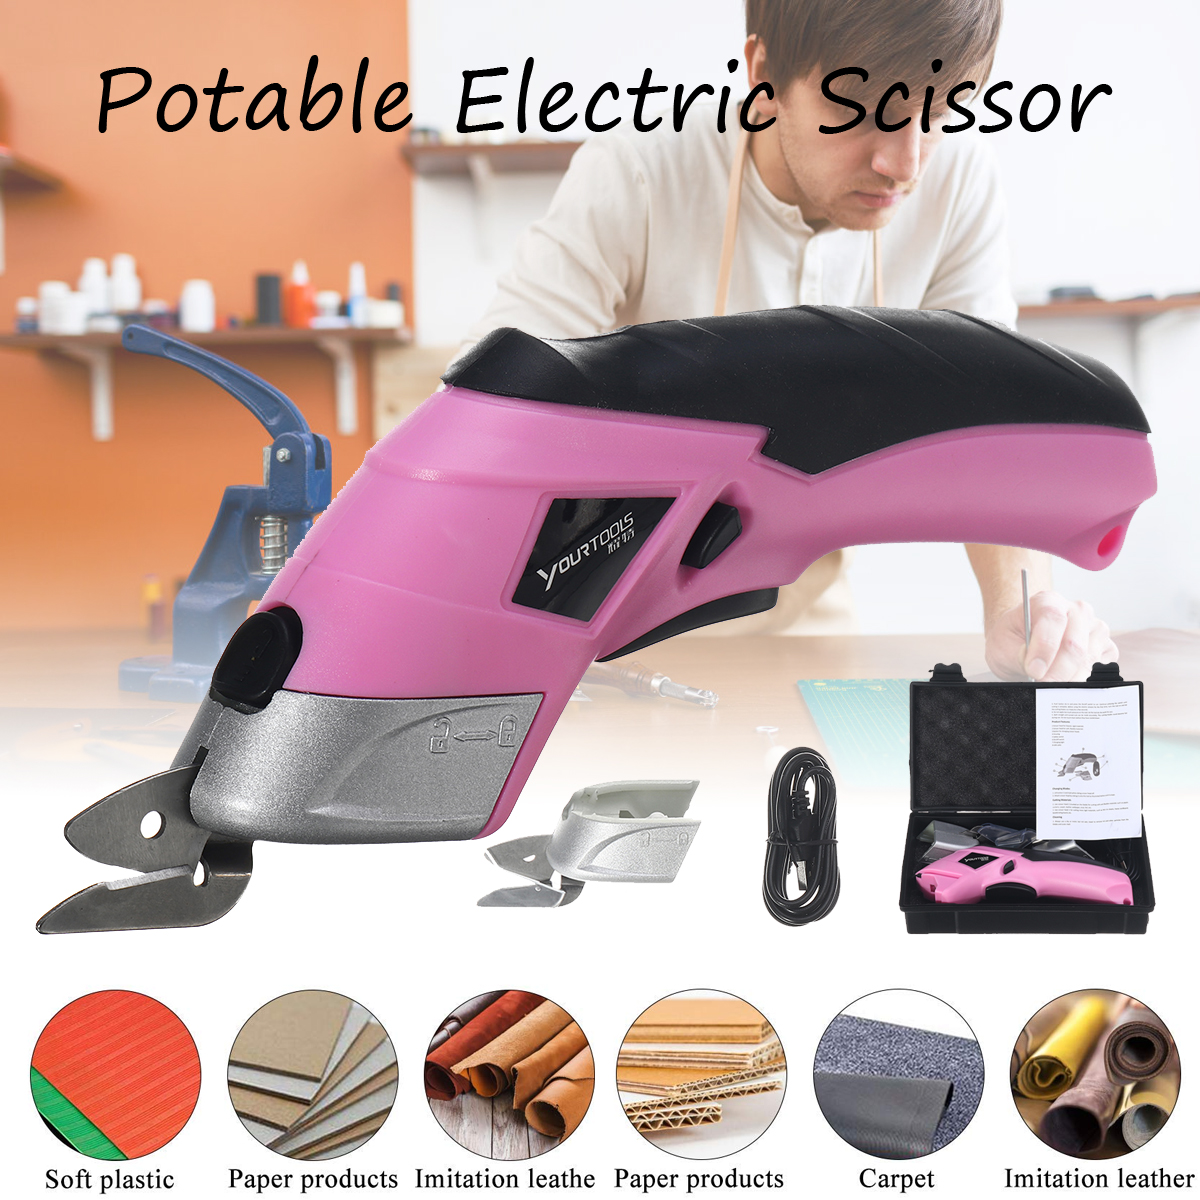 USB-Rechargeable-Potable-Electric-Scissor-Auto-Cutter-Cordless-with-2-Blades-Simplicity-Household-1637325-1